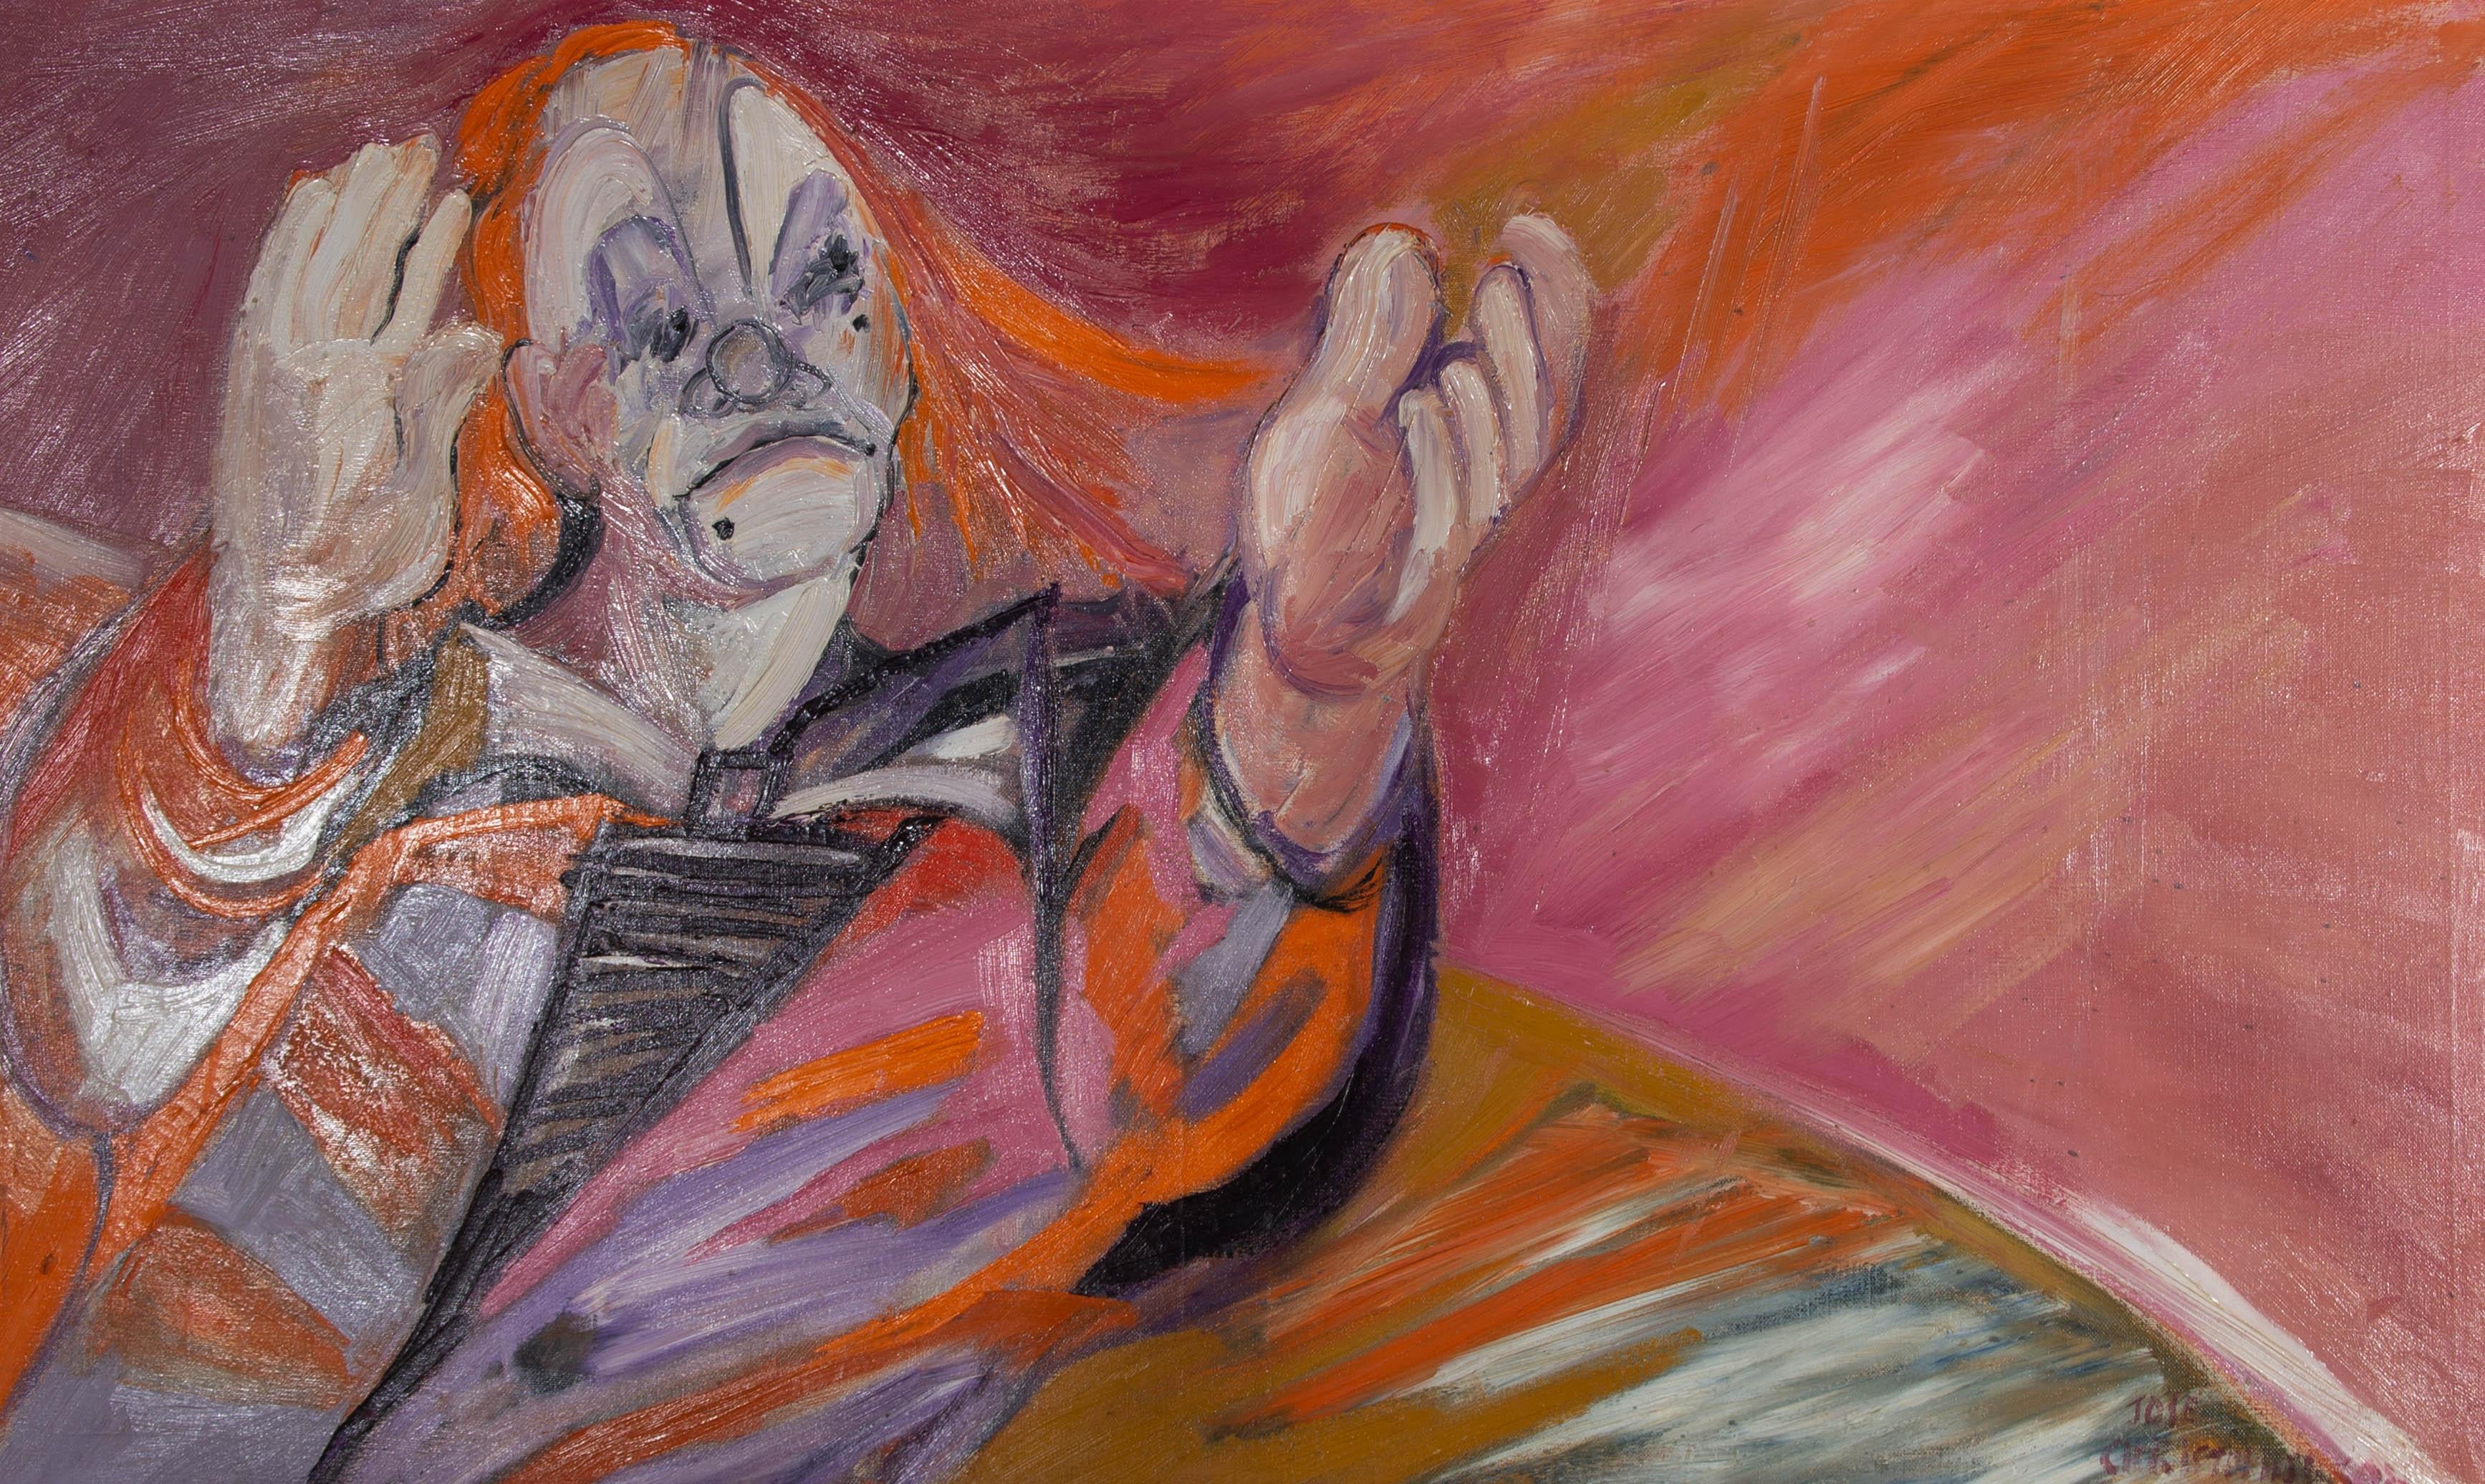 José Christopherson (1914–2014) - Mid 20th Century Oil, Applauding Clown - Painting by Jose Christopherson